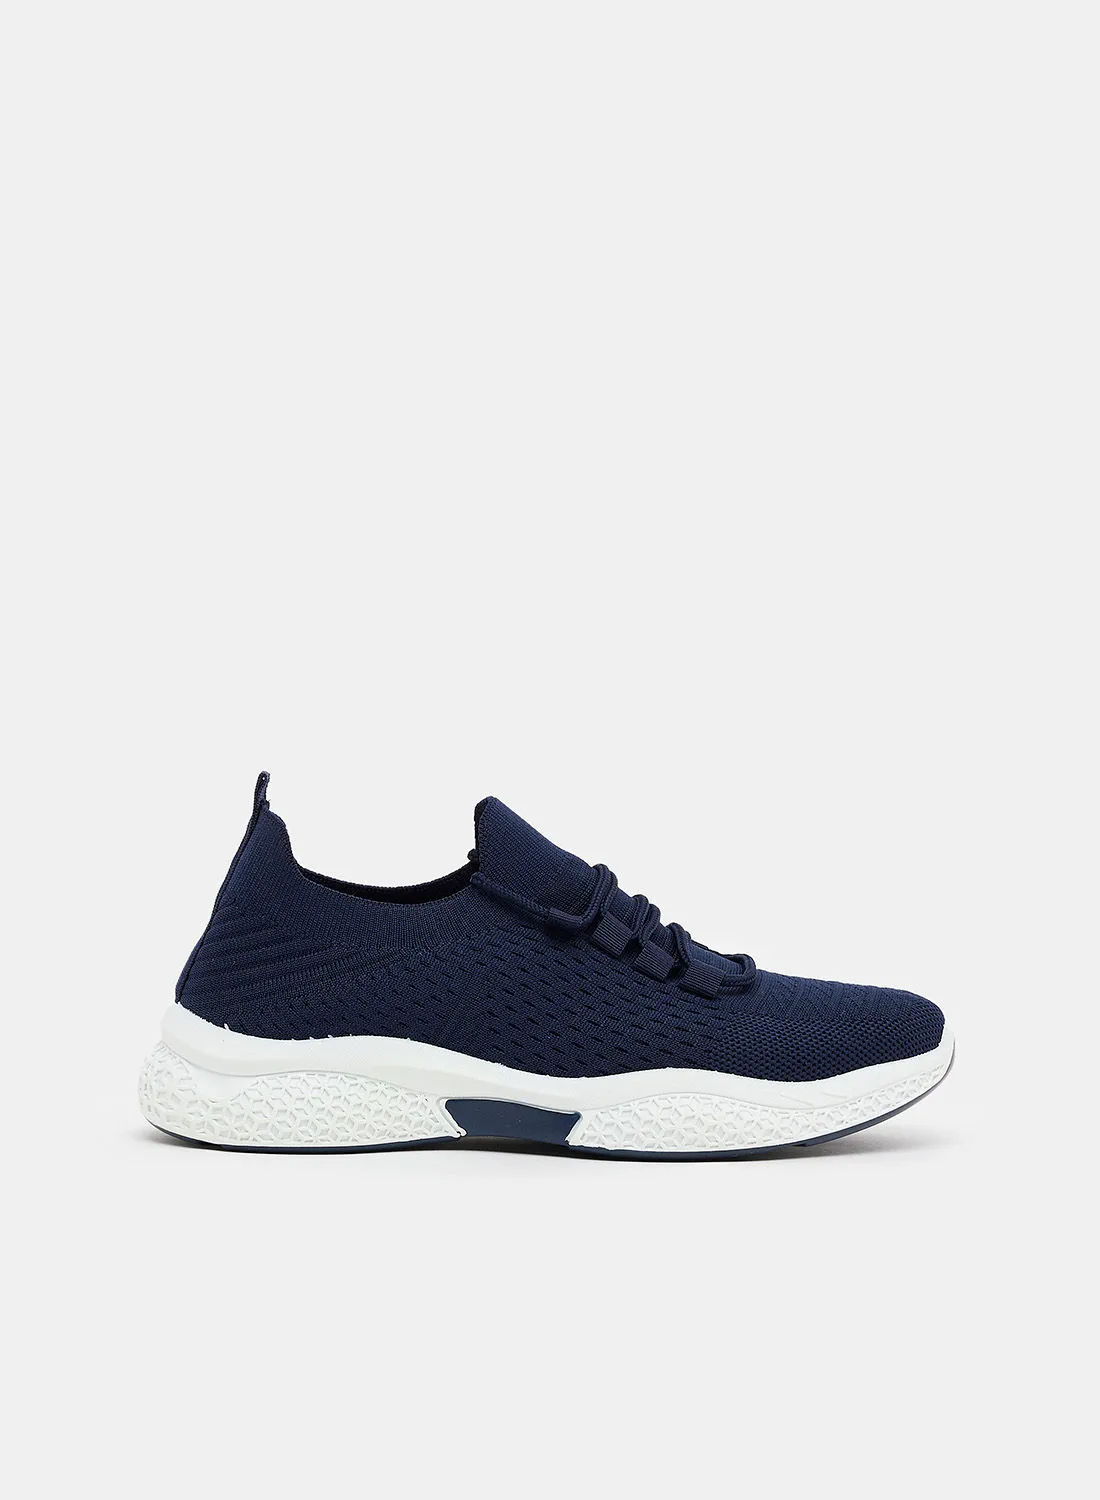 Spot-On Elasticated Lace-Up Sneakers